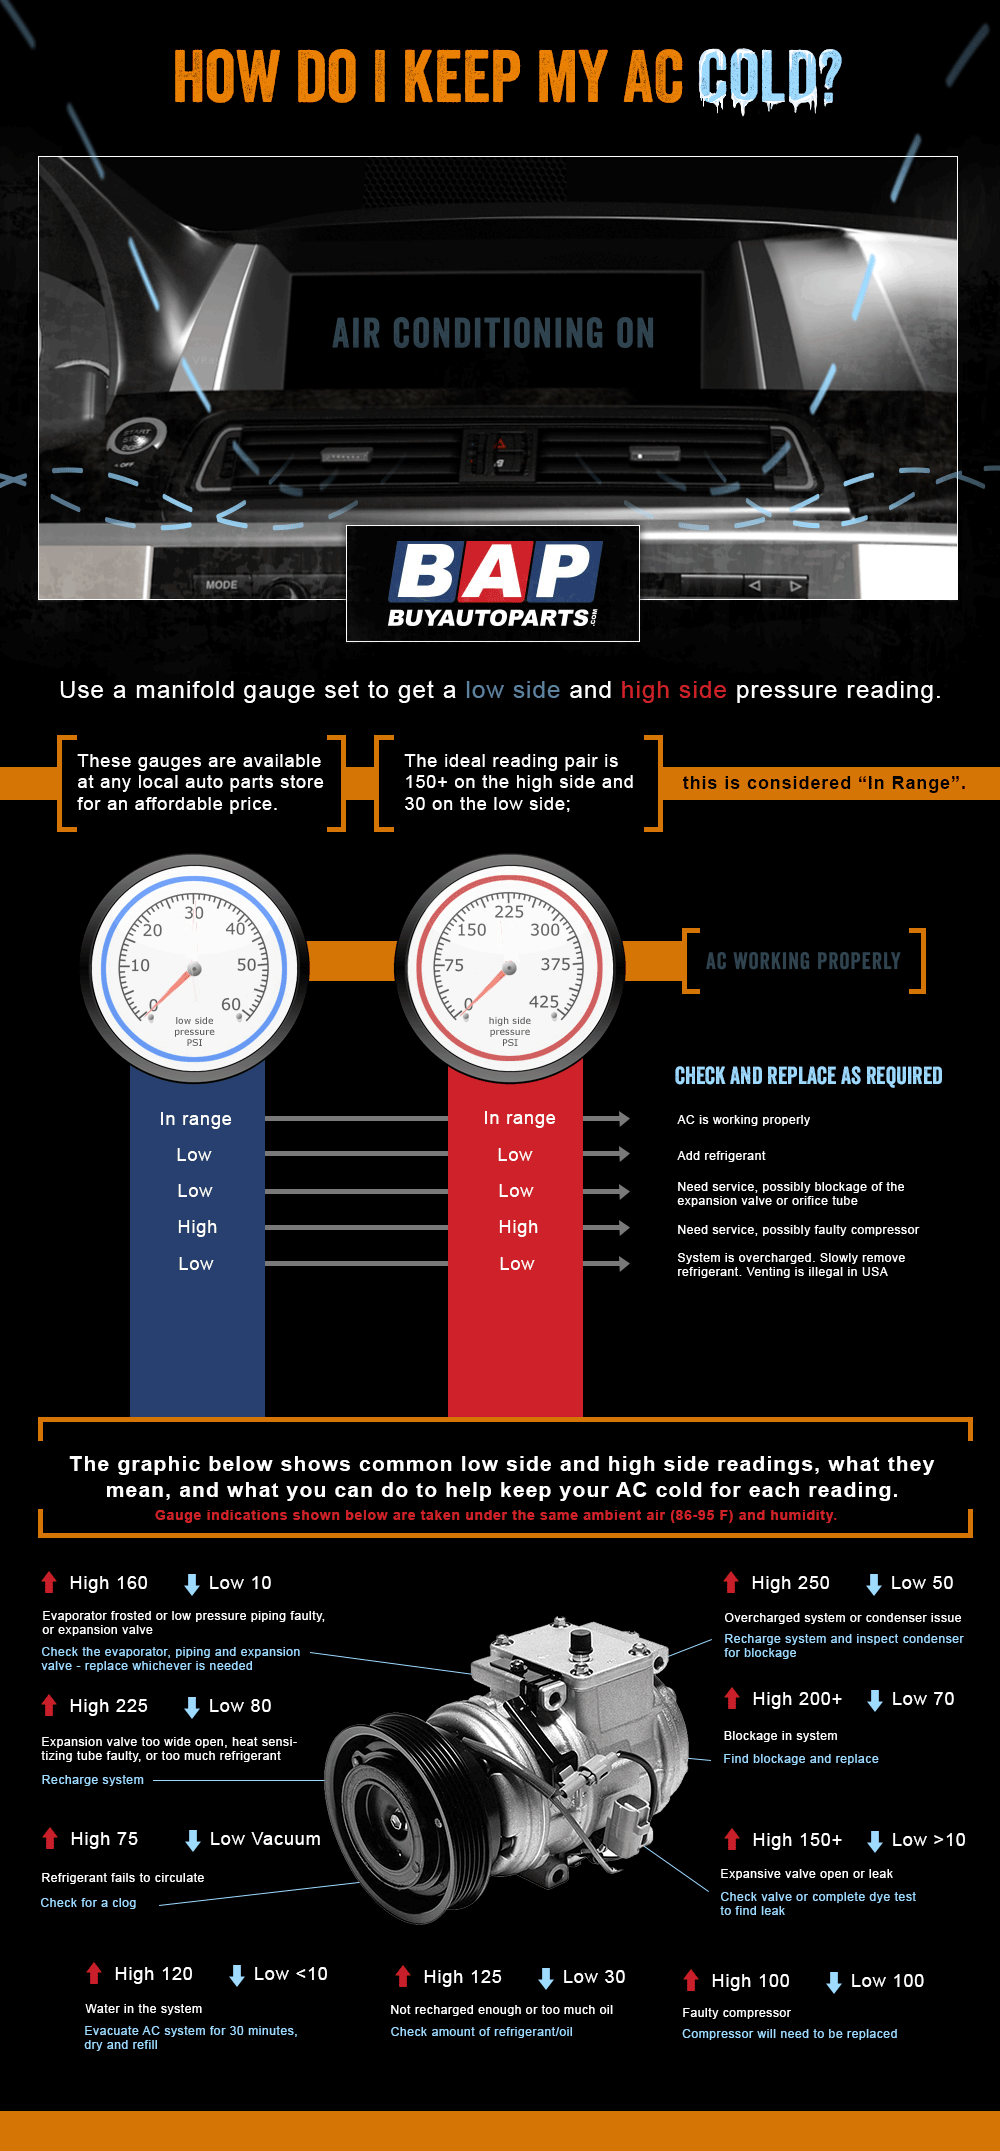 How Do I Keep My AC Cold? Infographic